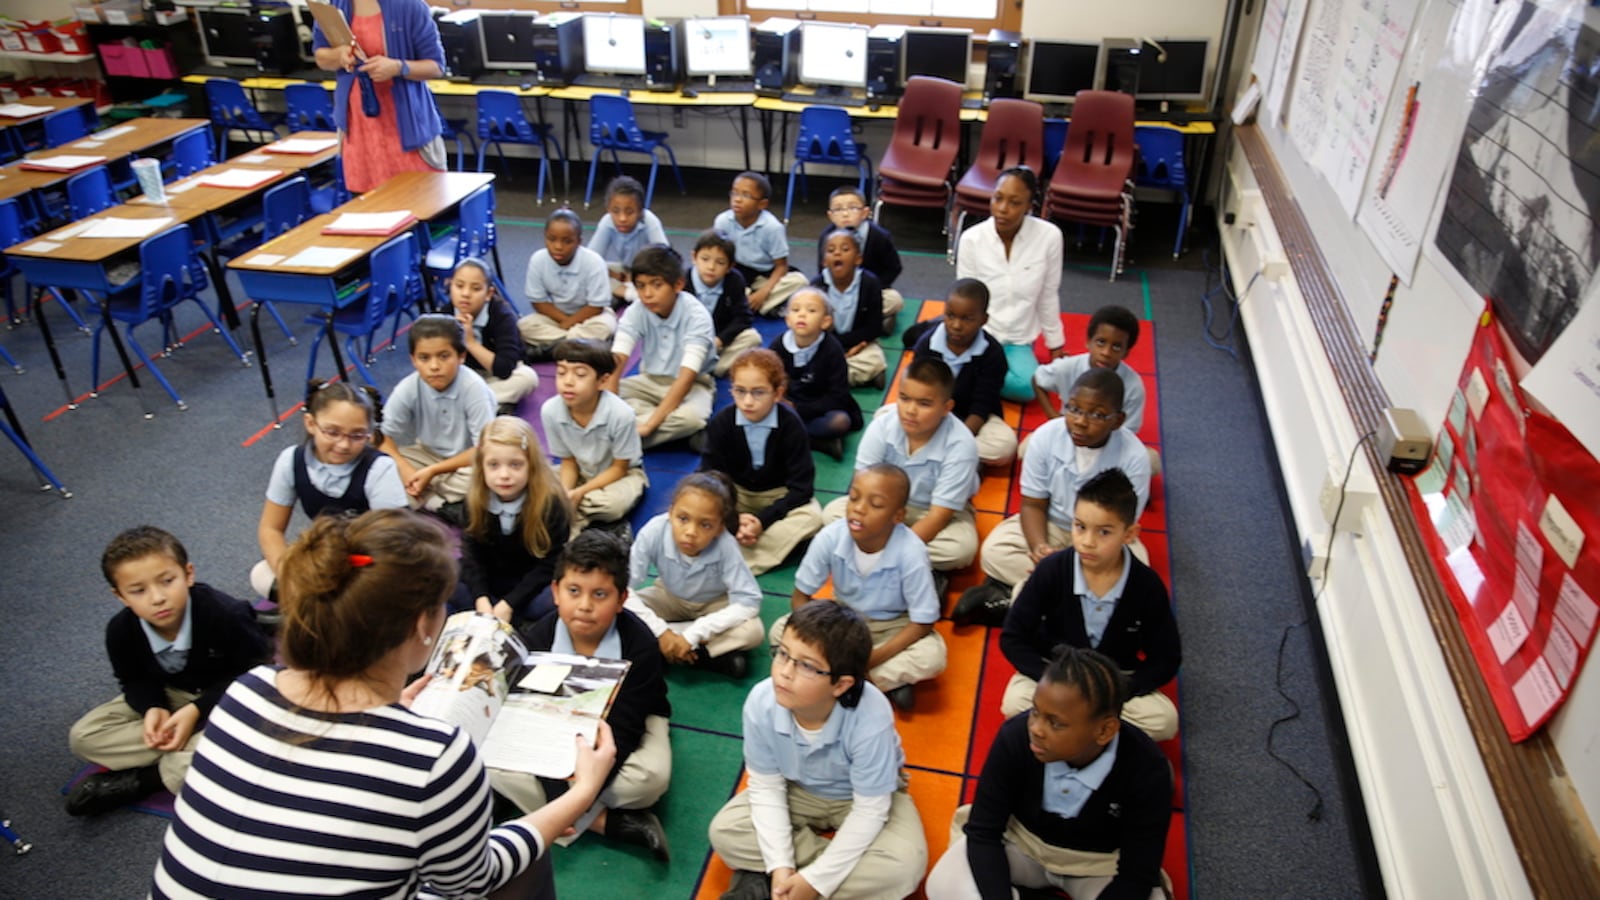 Young students in matching school uniforms sit criss-cross-applesauce on a colorful rug. They are facing the camera. A teacher with her back to the camera reads the students a book.